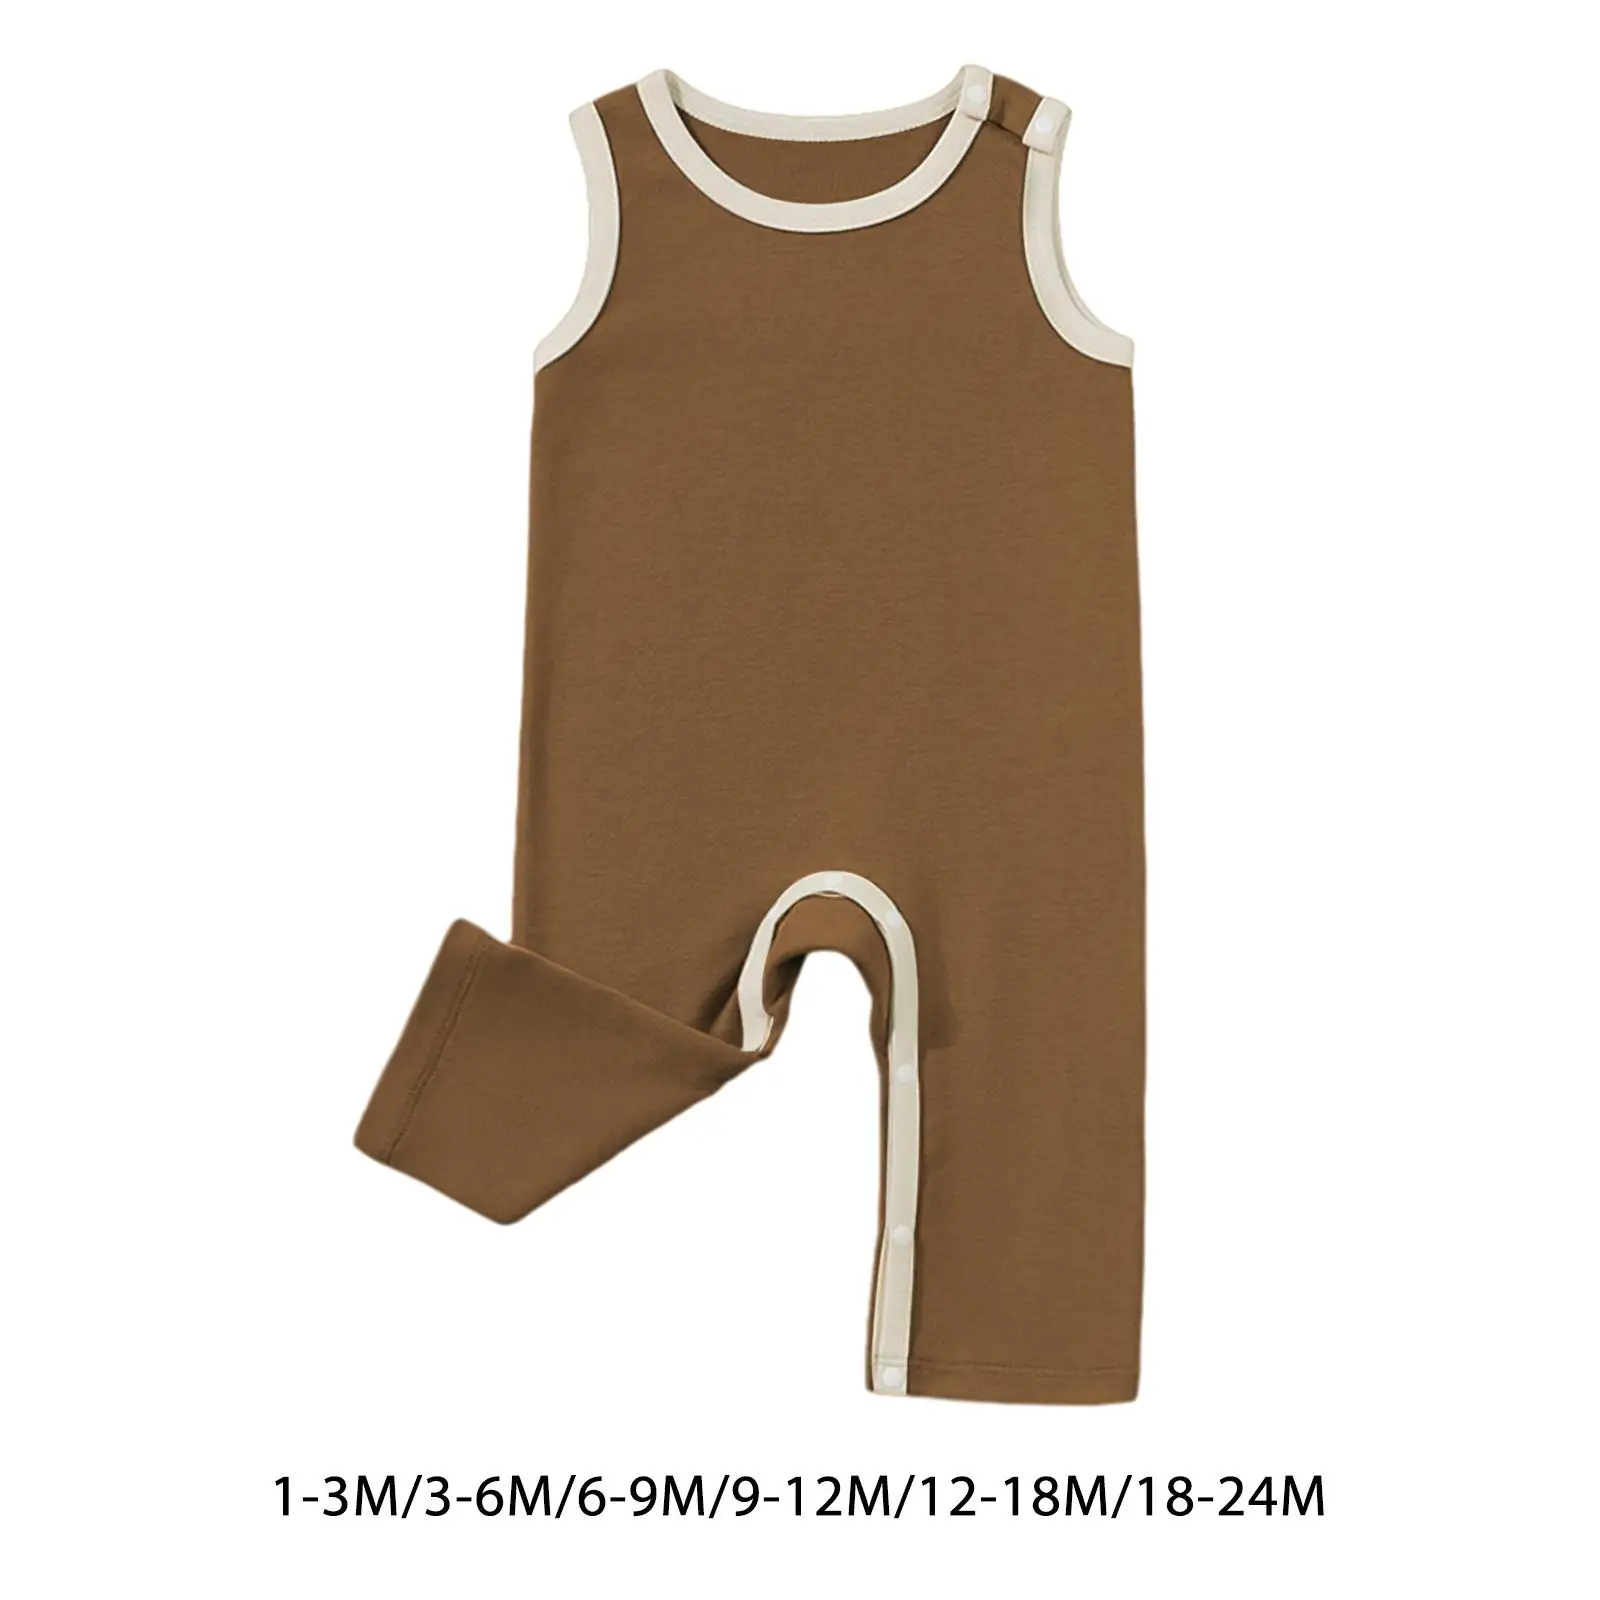 

Baby Summer Romper Round Neck Cotton Baby Boys Girls Sleeveless Romper for Festival Outdoor Family Gathering Homewear Casual